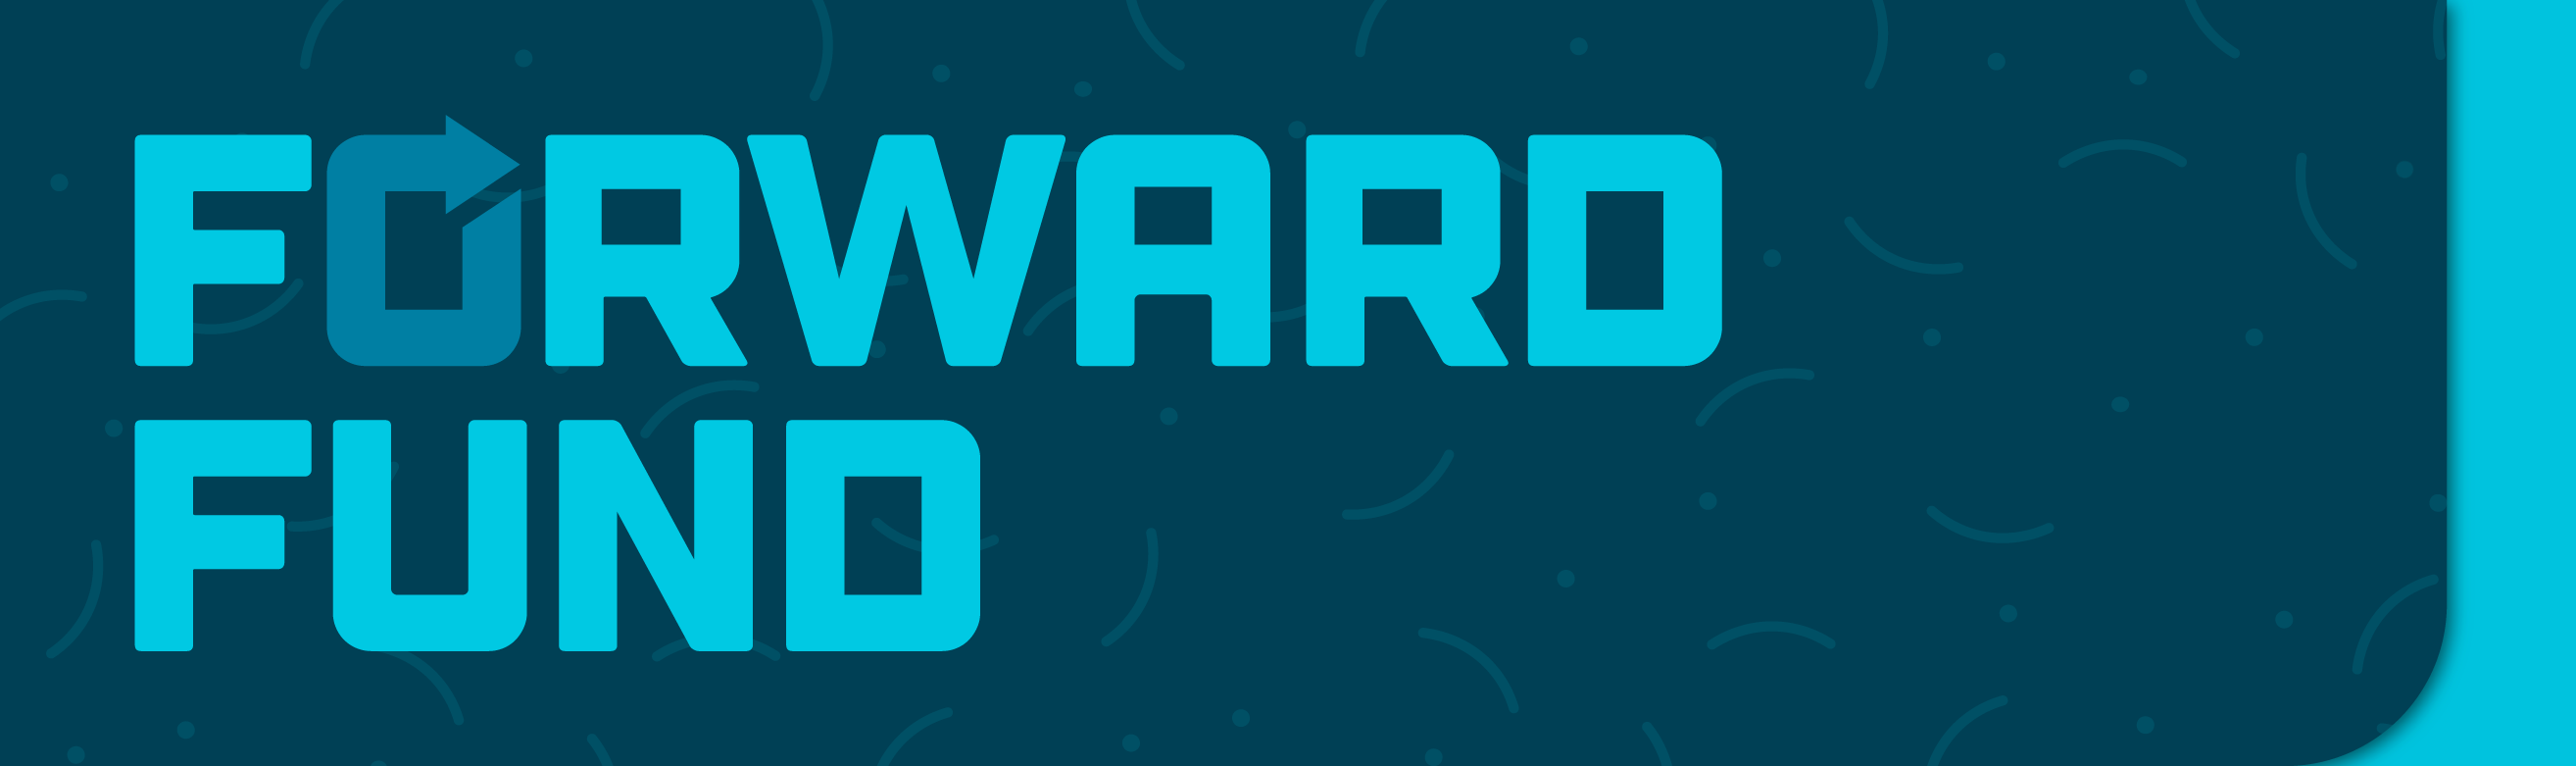 Forward_Fund_Web_Banner-(2).png